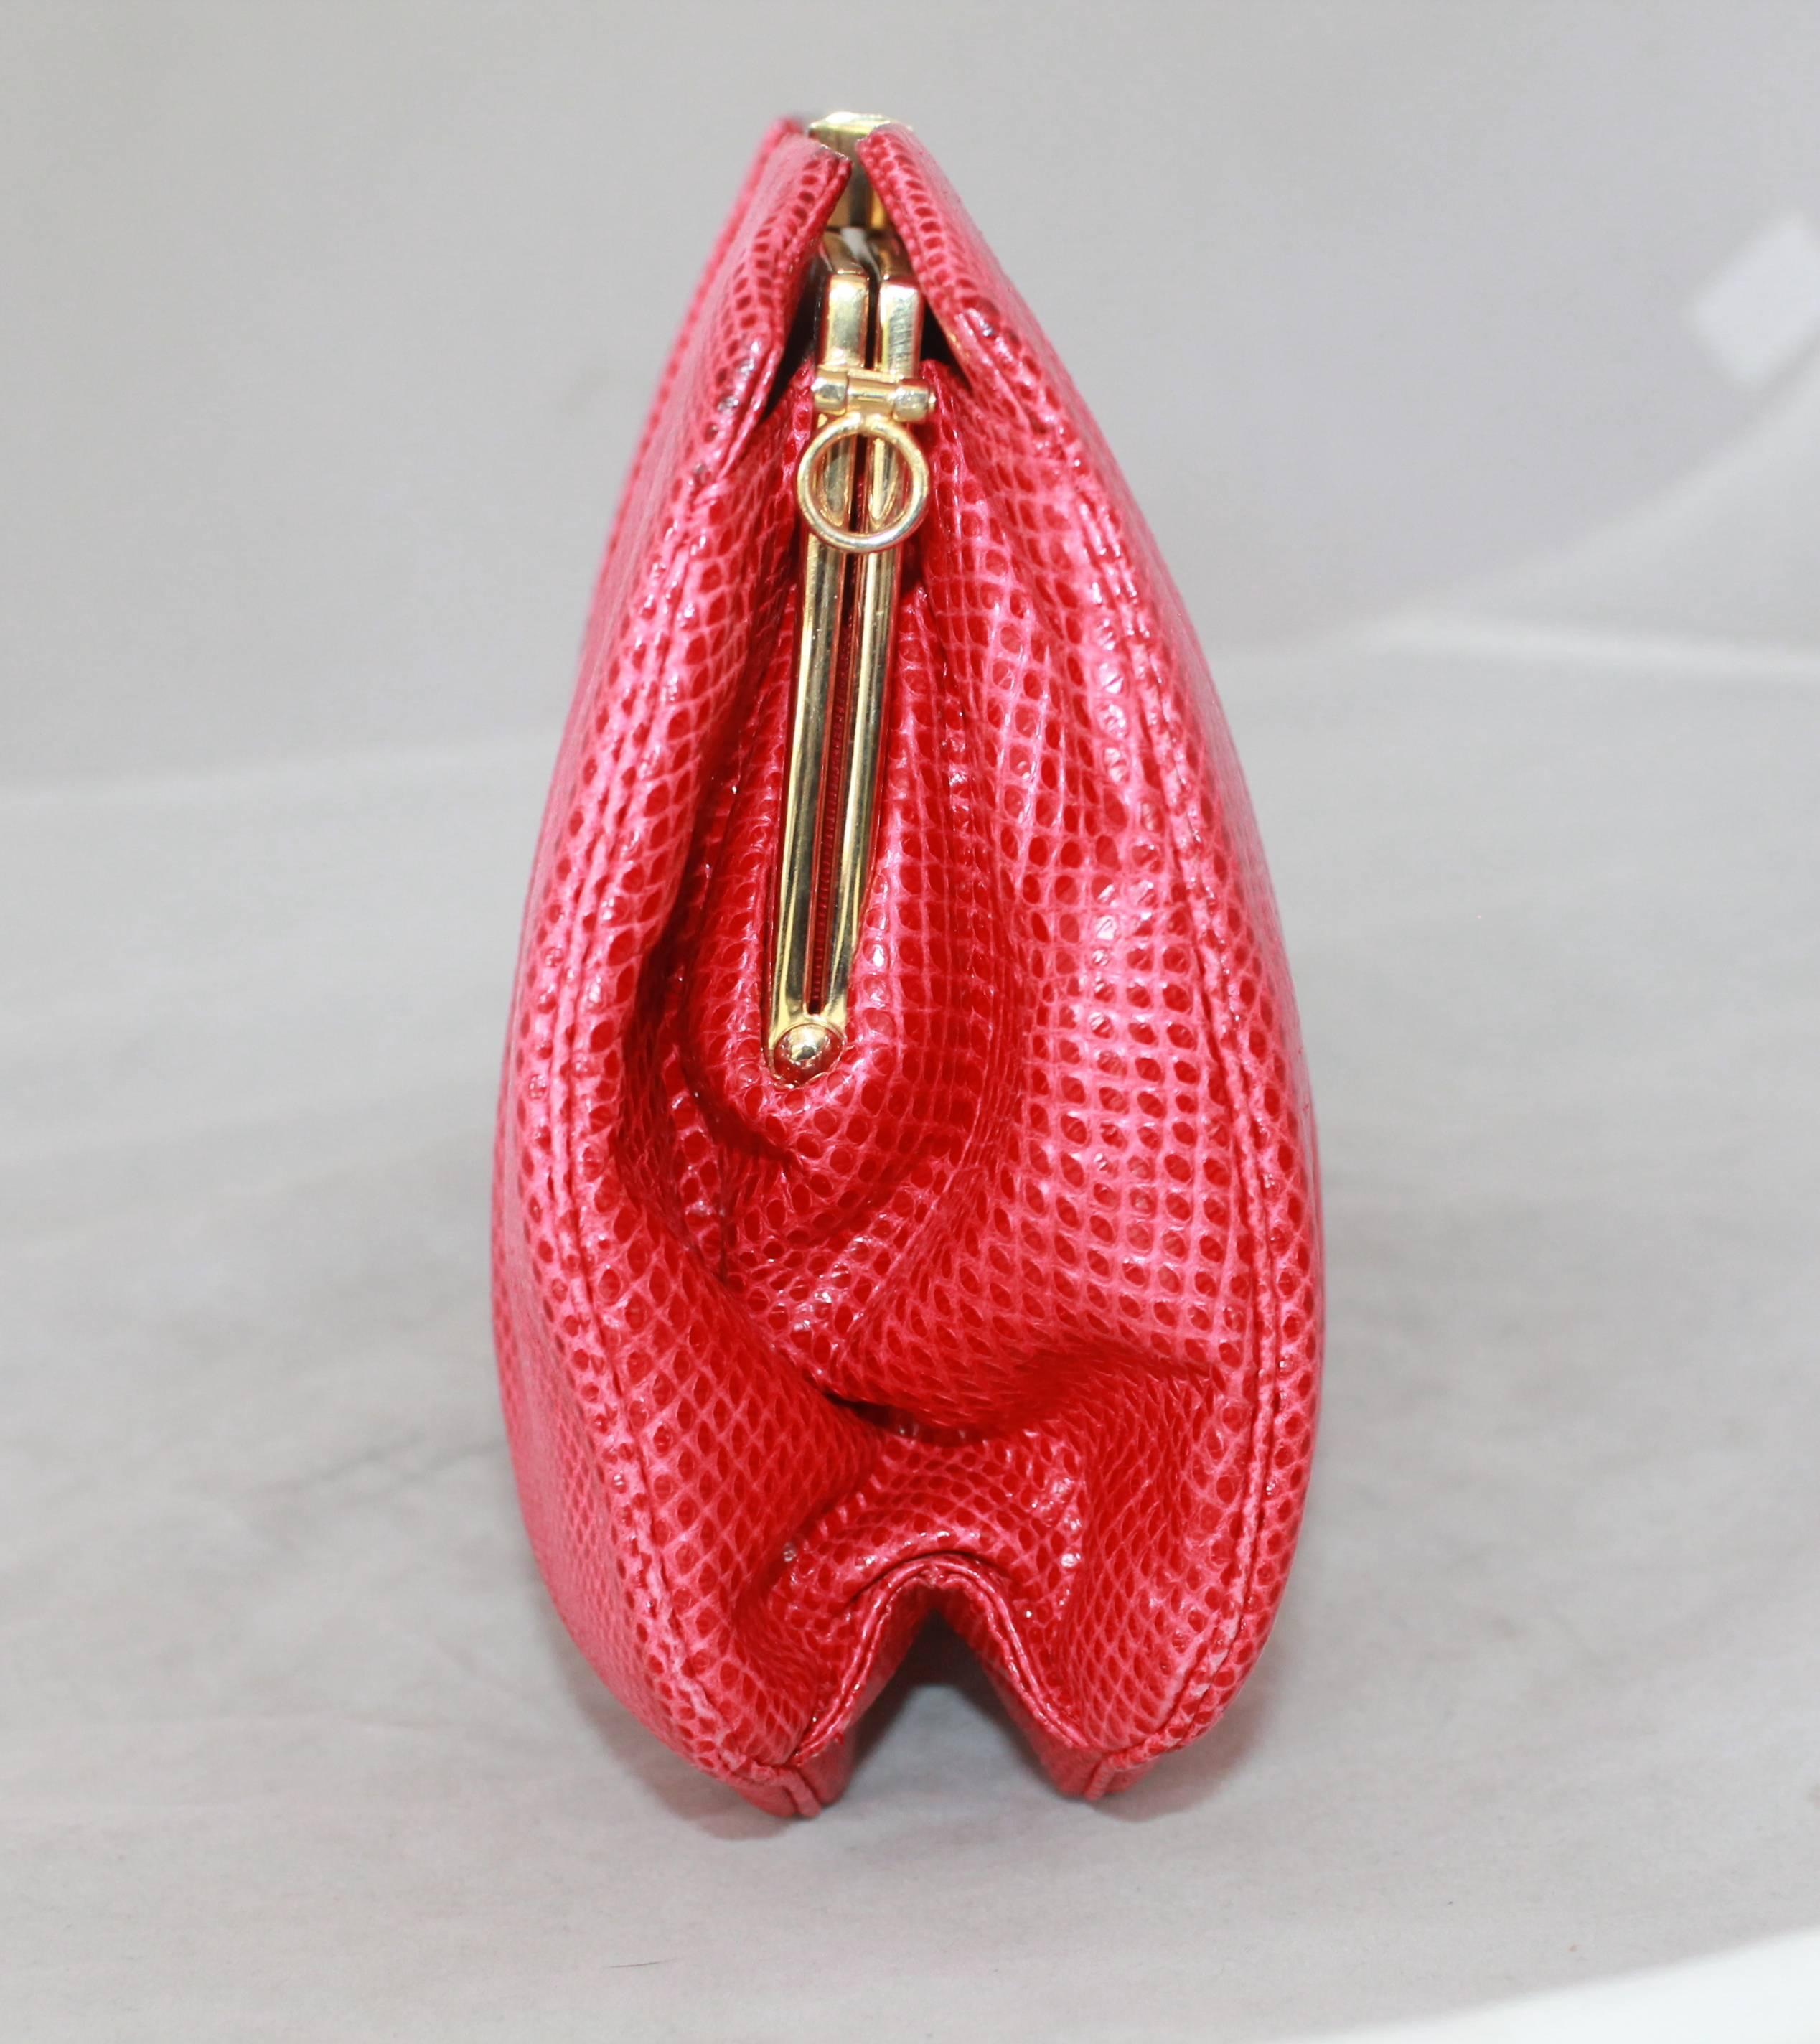 Judith Leiber 1970's Vintage Red Karung Snake Square Evening Bag.  This bag is in good condition with minor wear on the bottom consistent with its age and one noticeable stain on the front left corner.  It comes with a duster, removable strap, and